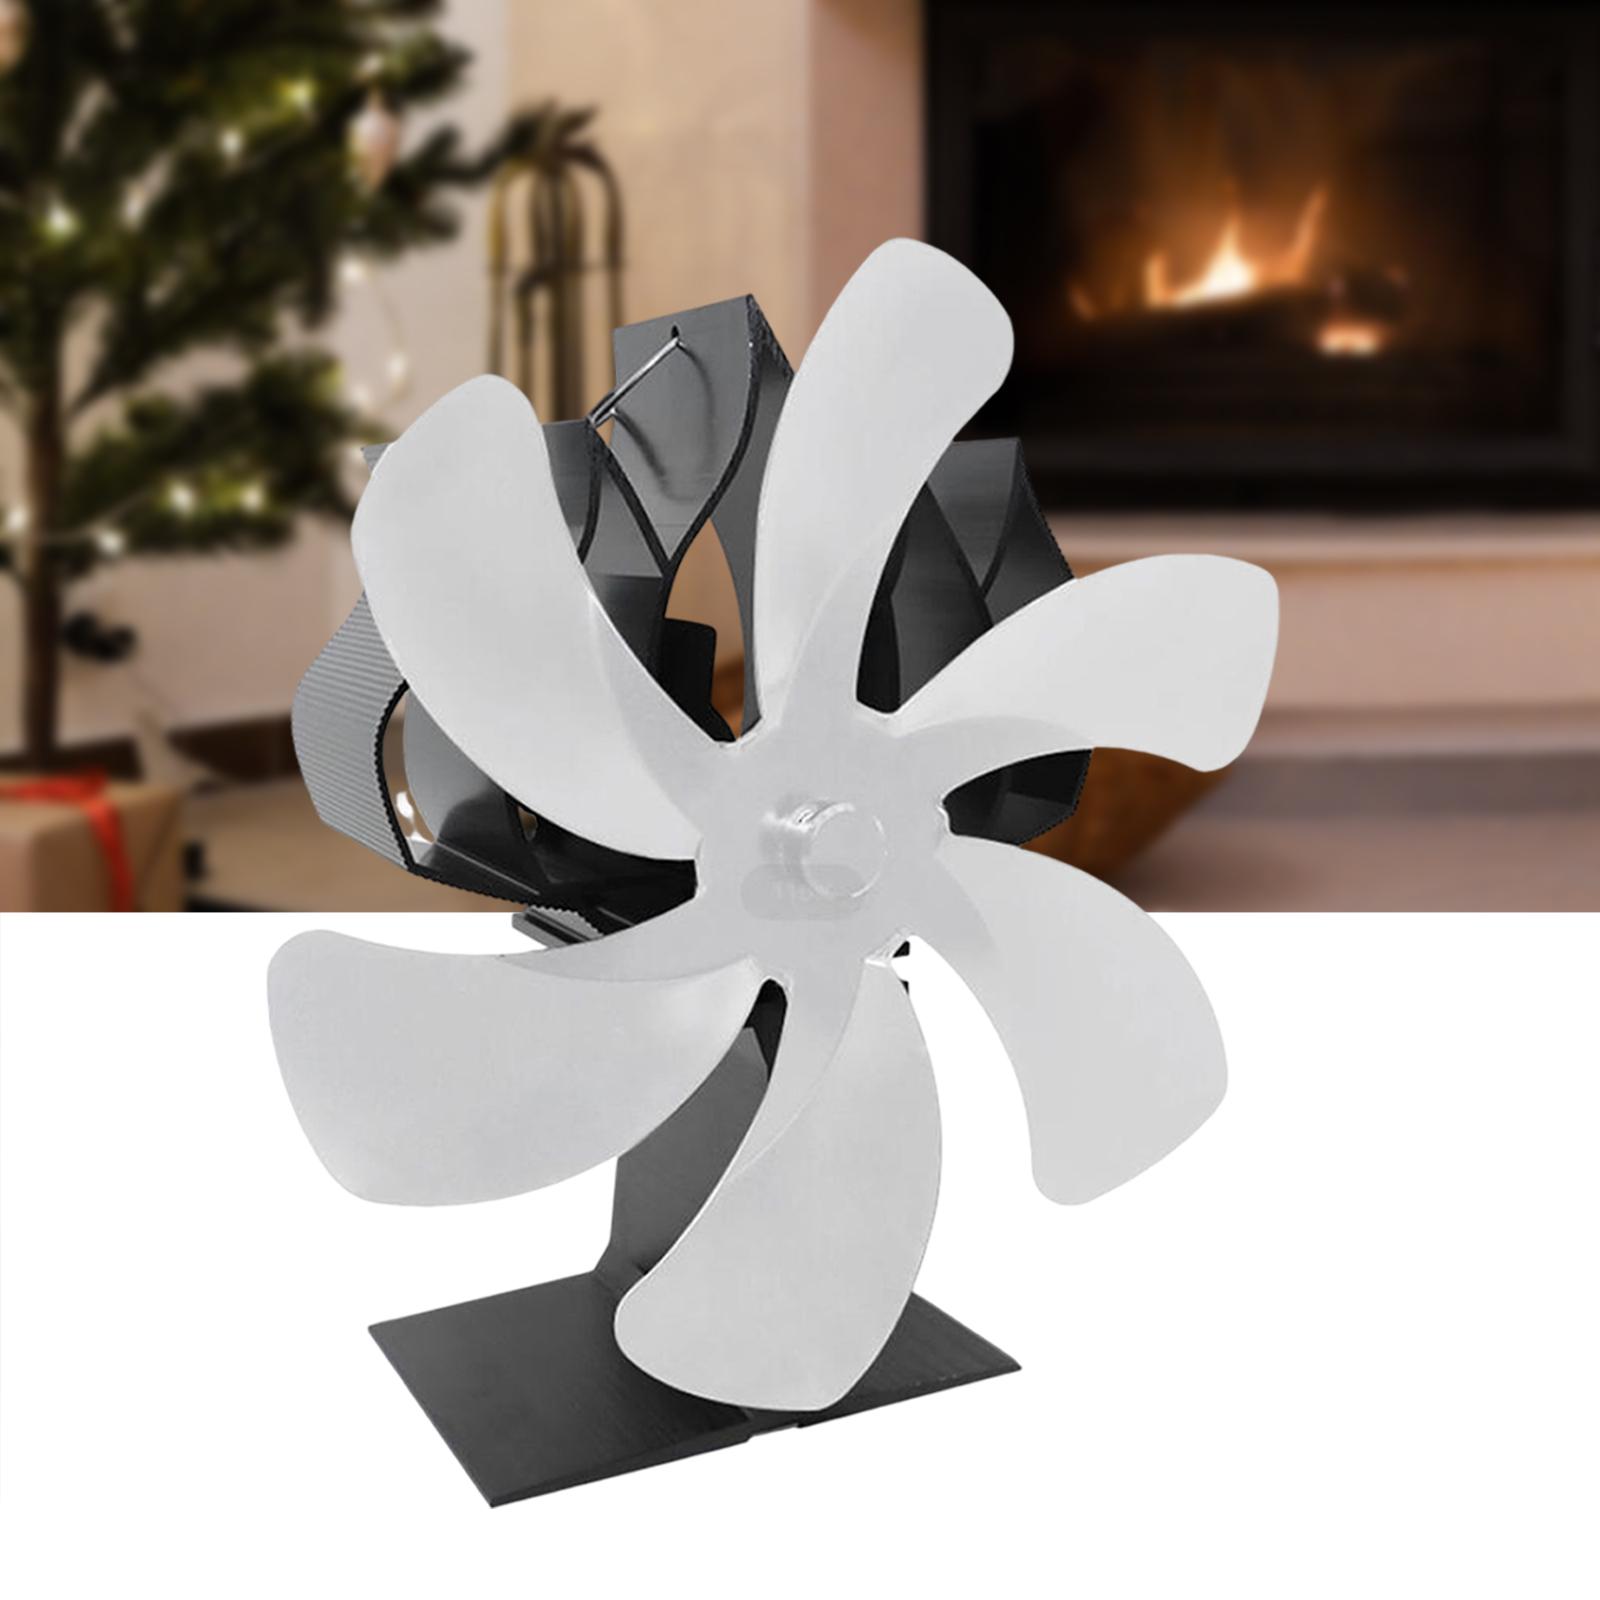 Hot Powered Fan Circulating Warm Fan for Bedroom Argent